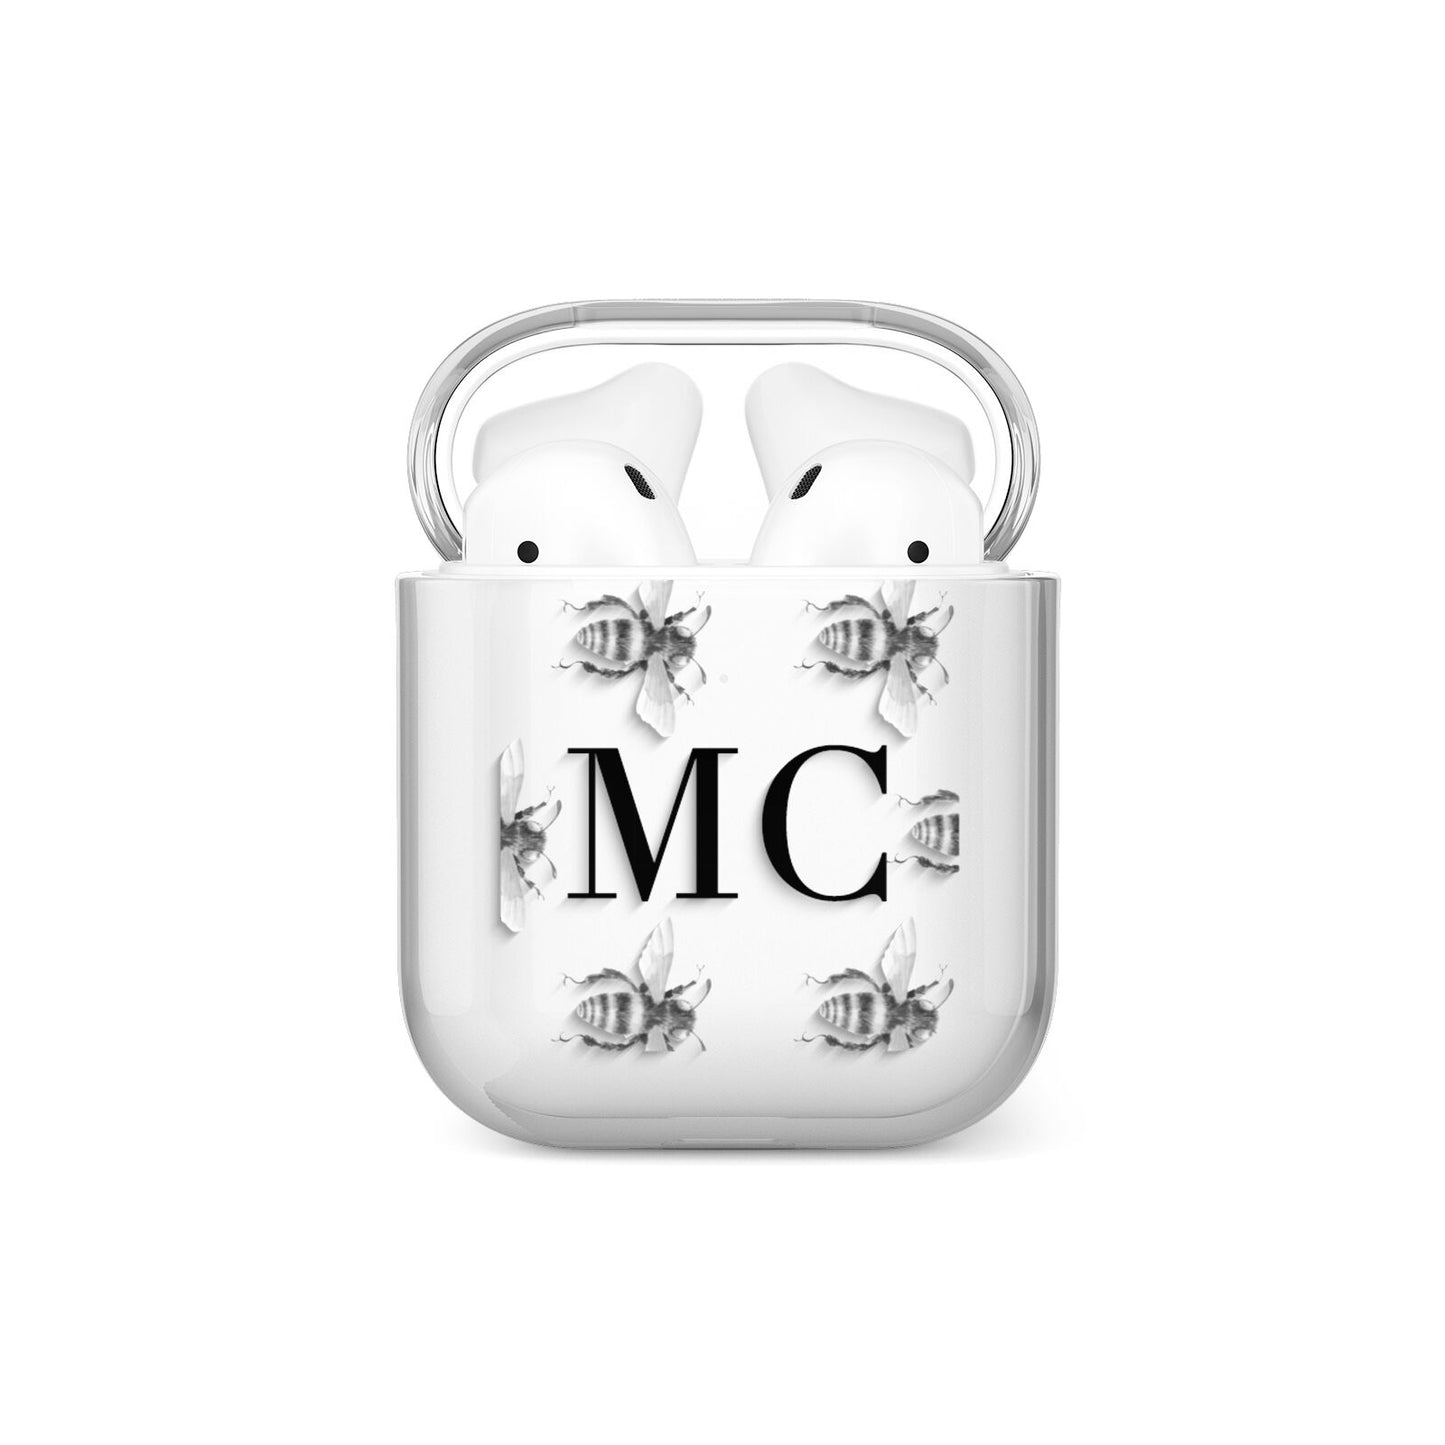 Monochrome Bees with Monogram AirPods Case